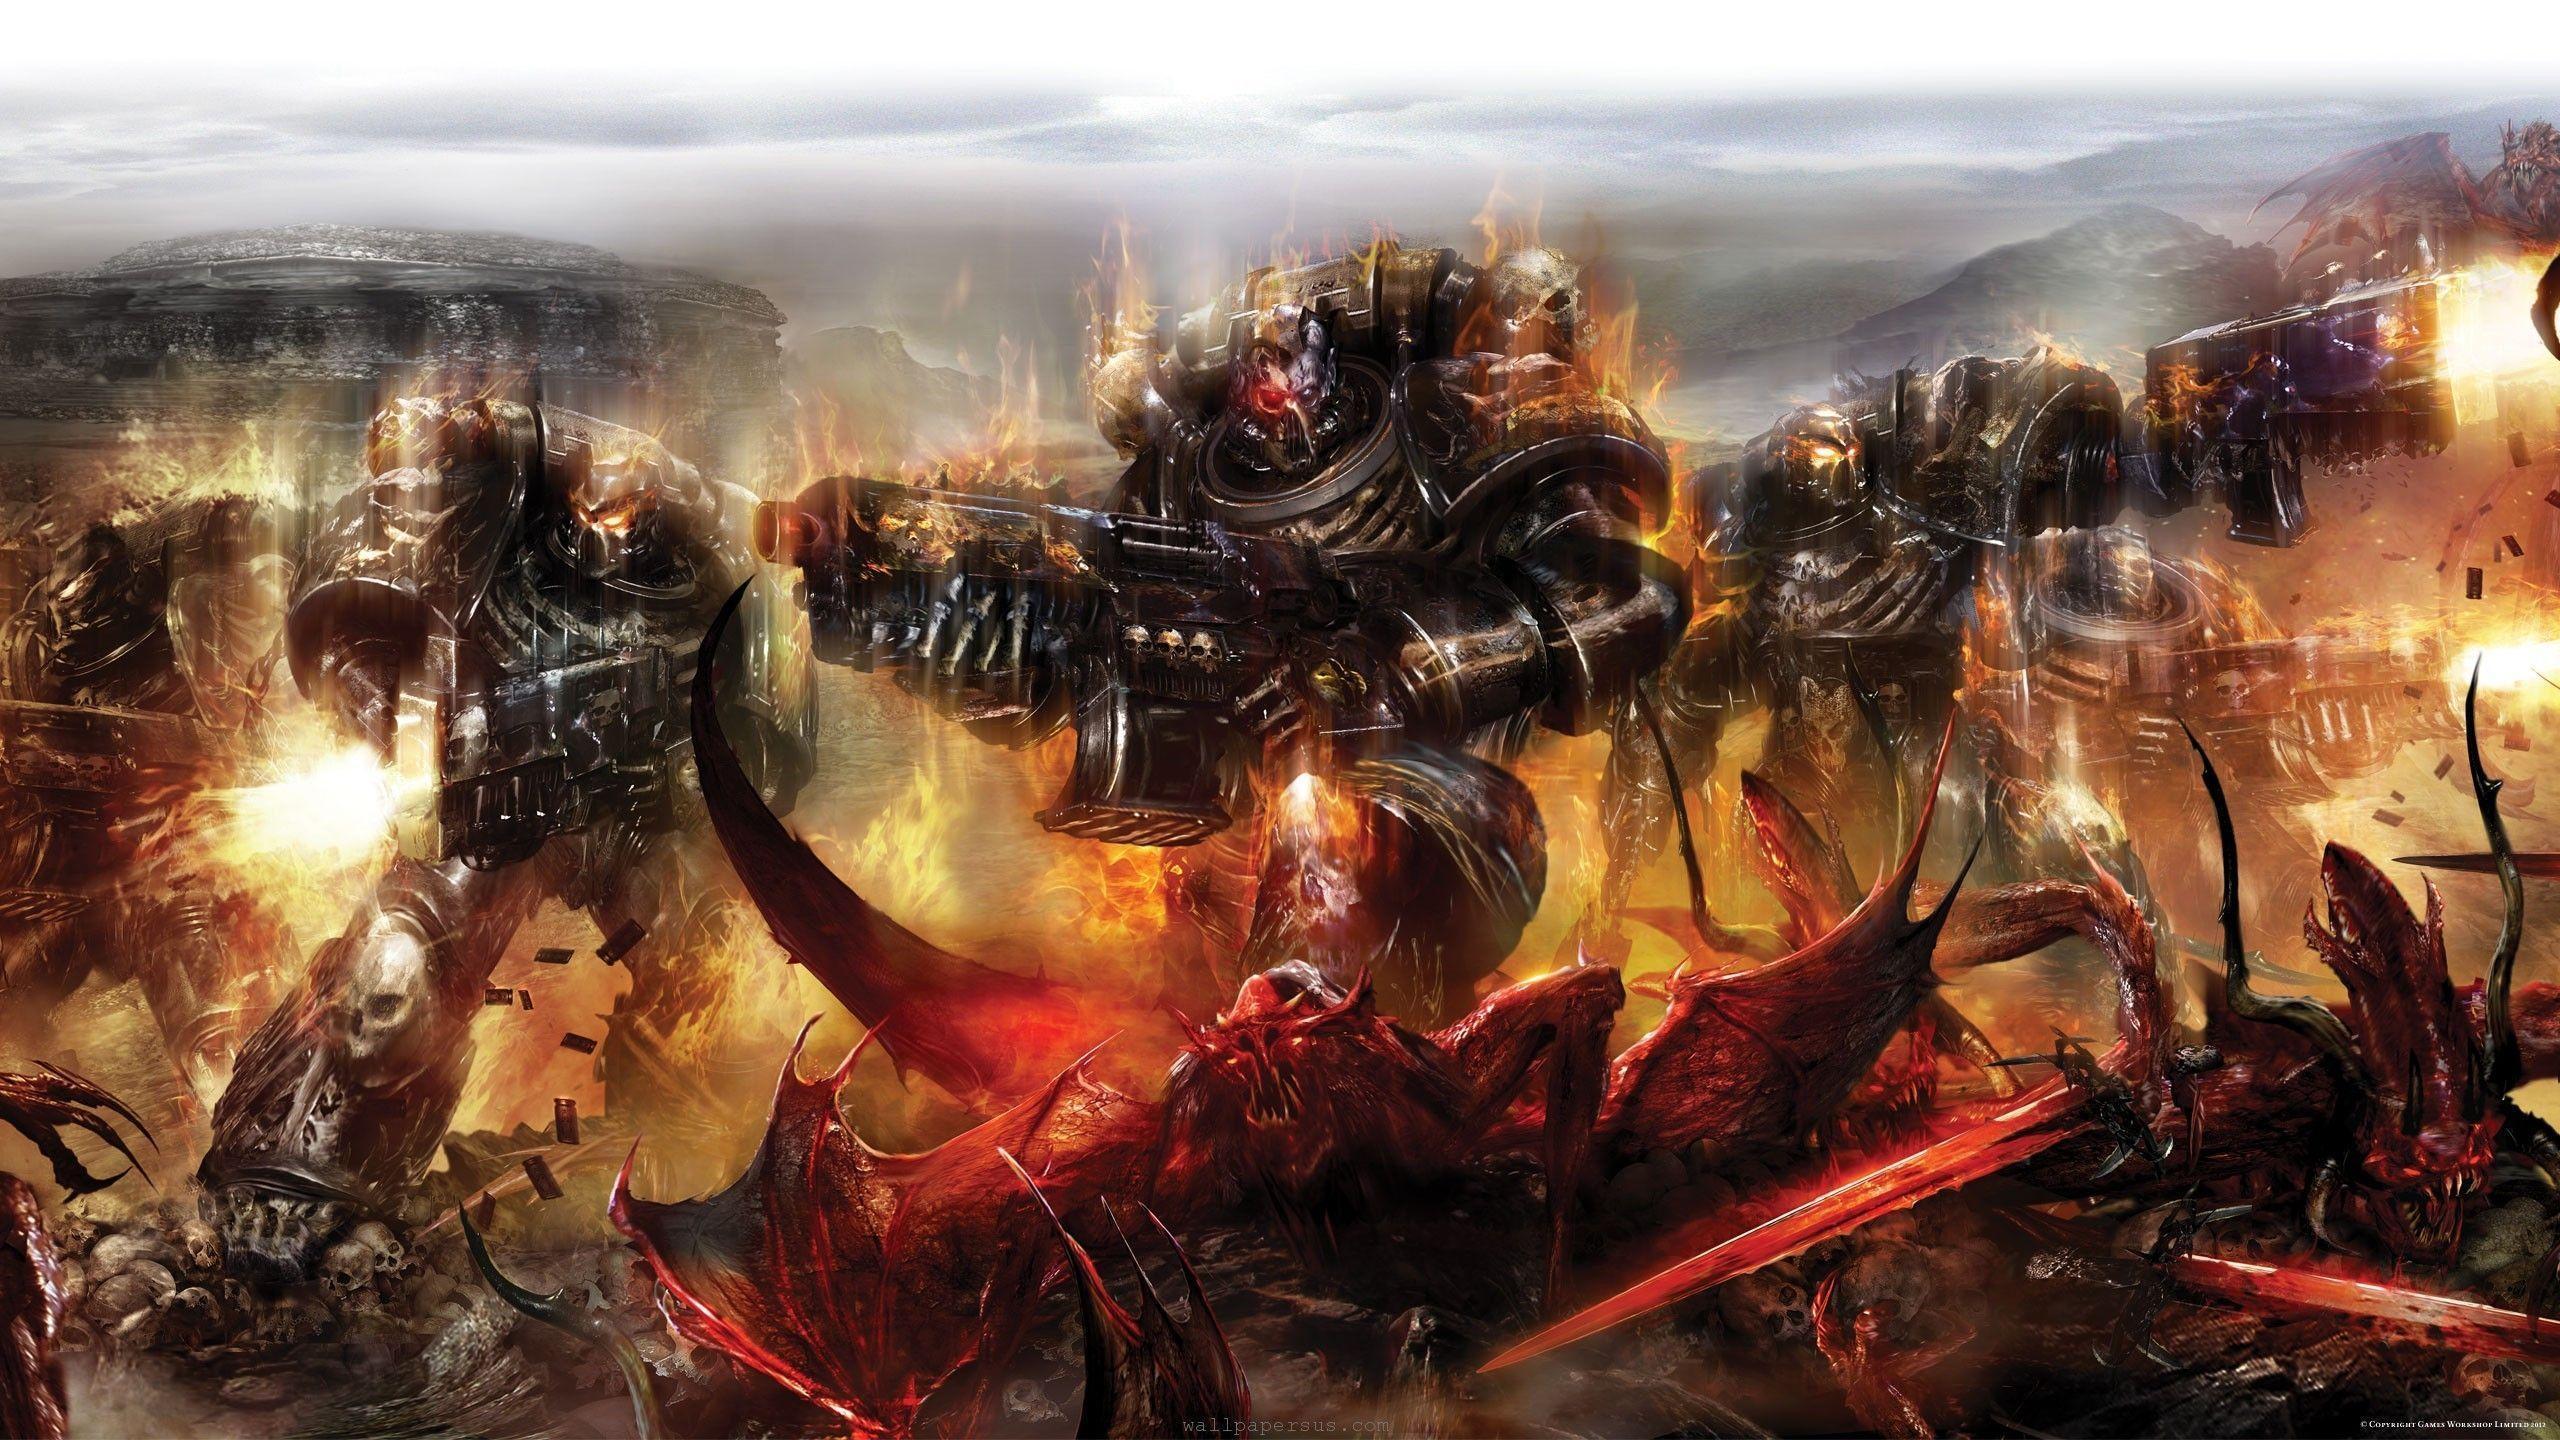 Video Game Warhammer 40k Wallpapers 2560x1440 px Free Download